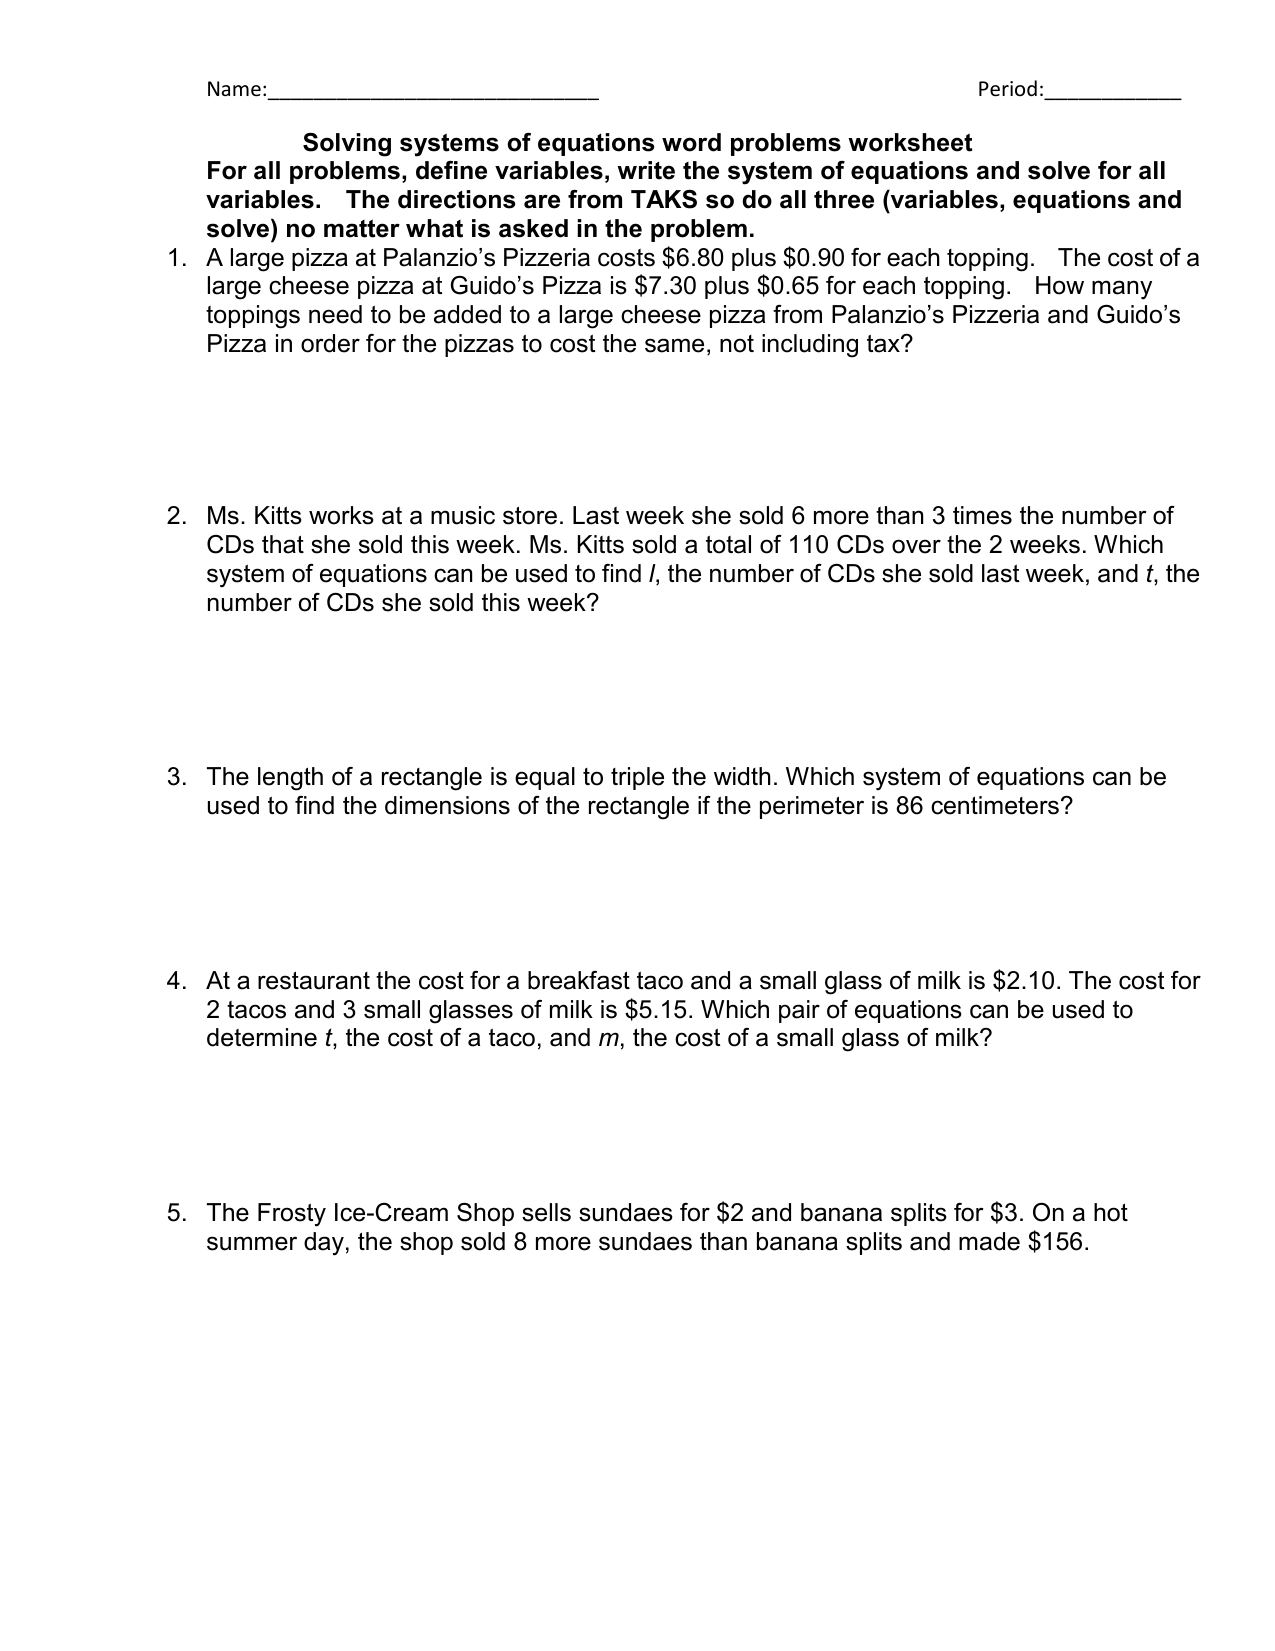 soe word problems worksheet Pertaining To Systems Of Equations Worksheet Pdf